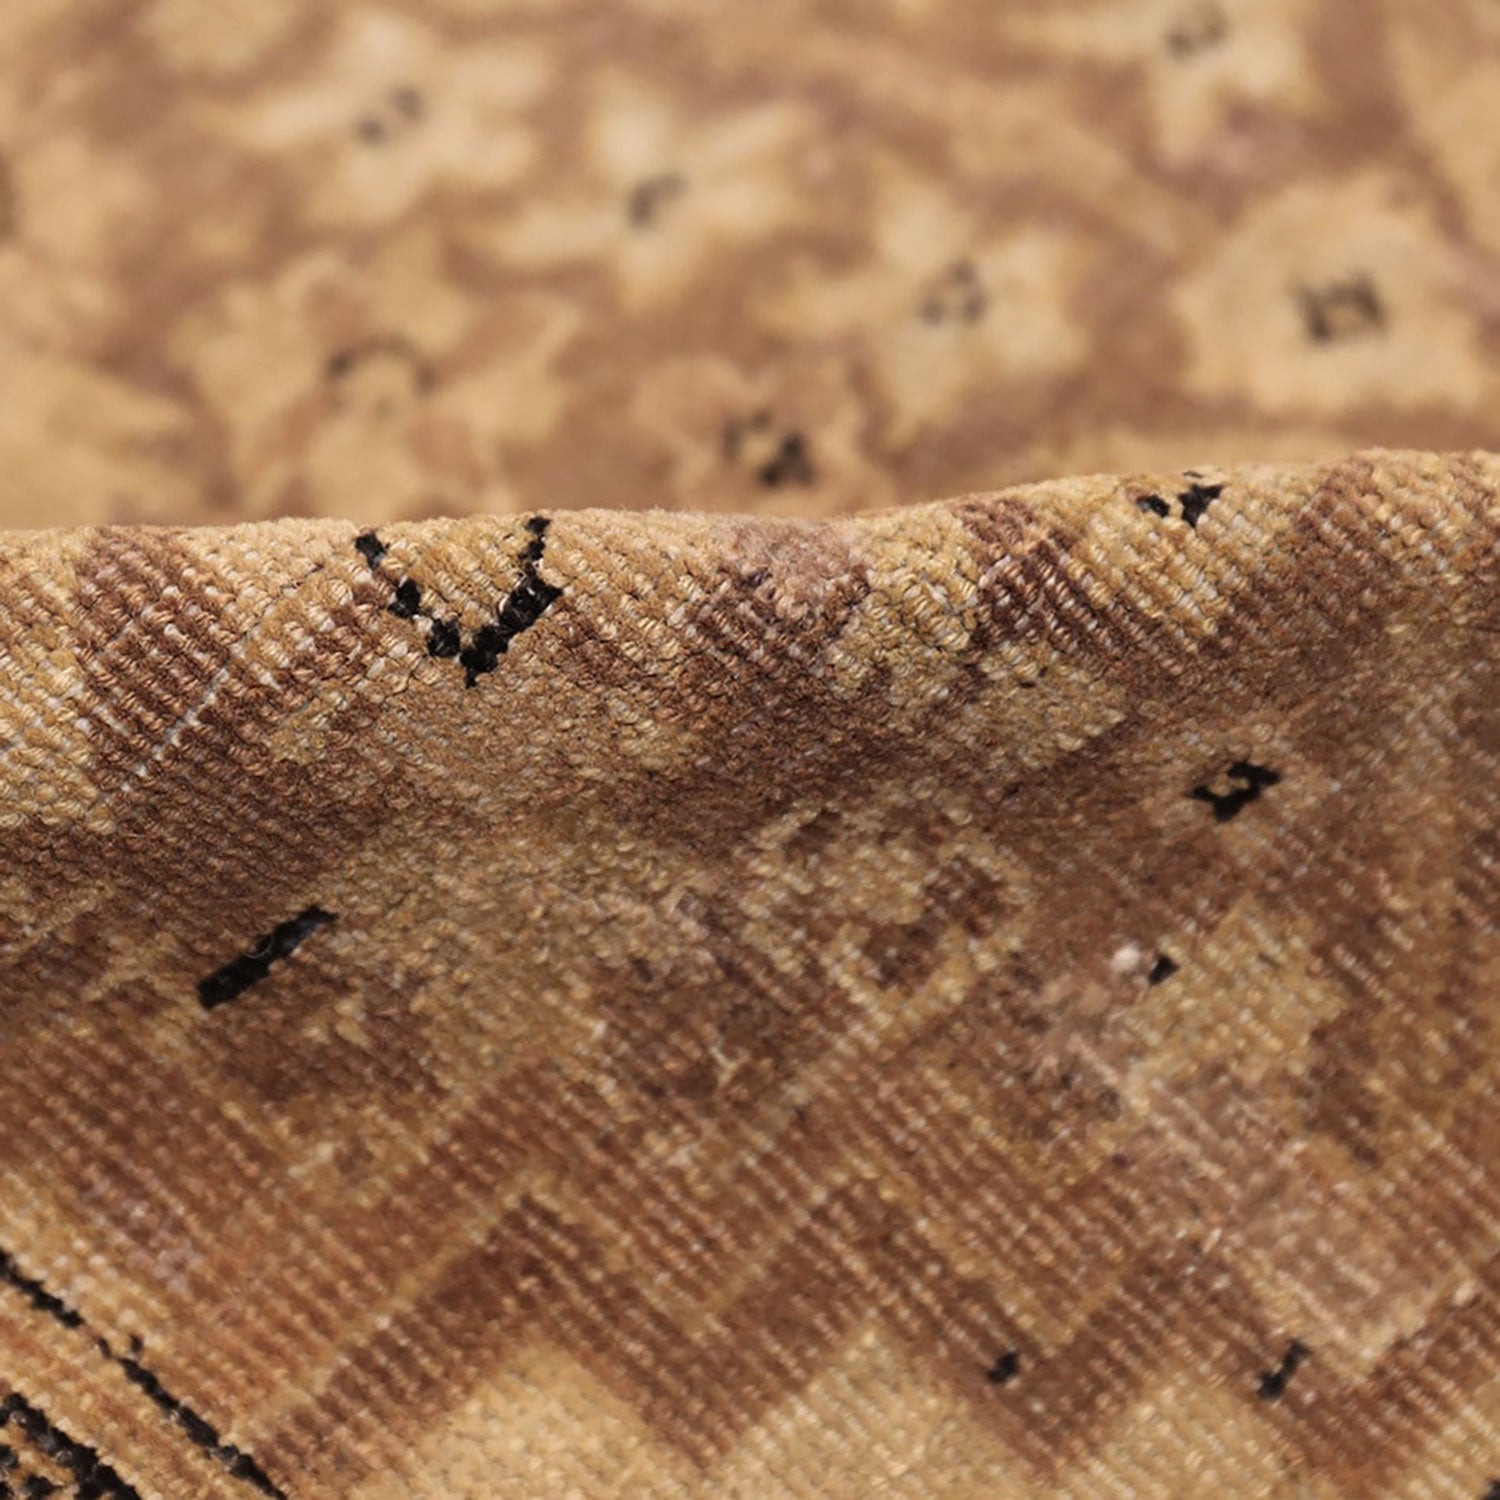 Close-up of textured fabric with brown and tan hues, showing wear.